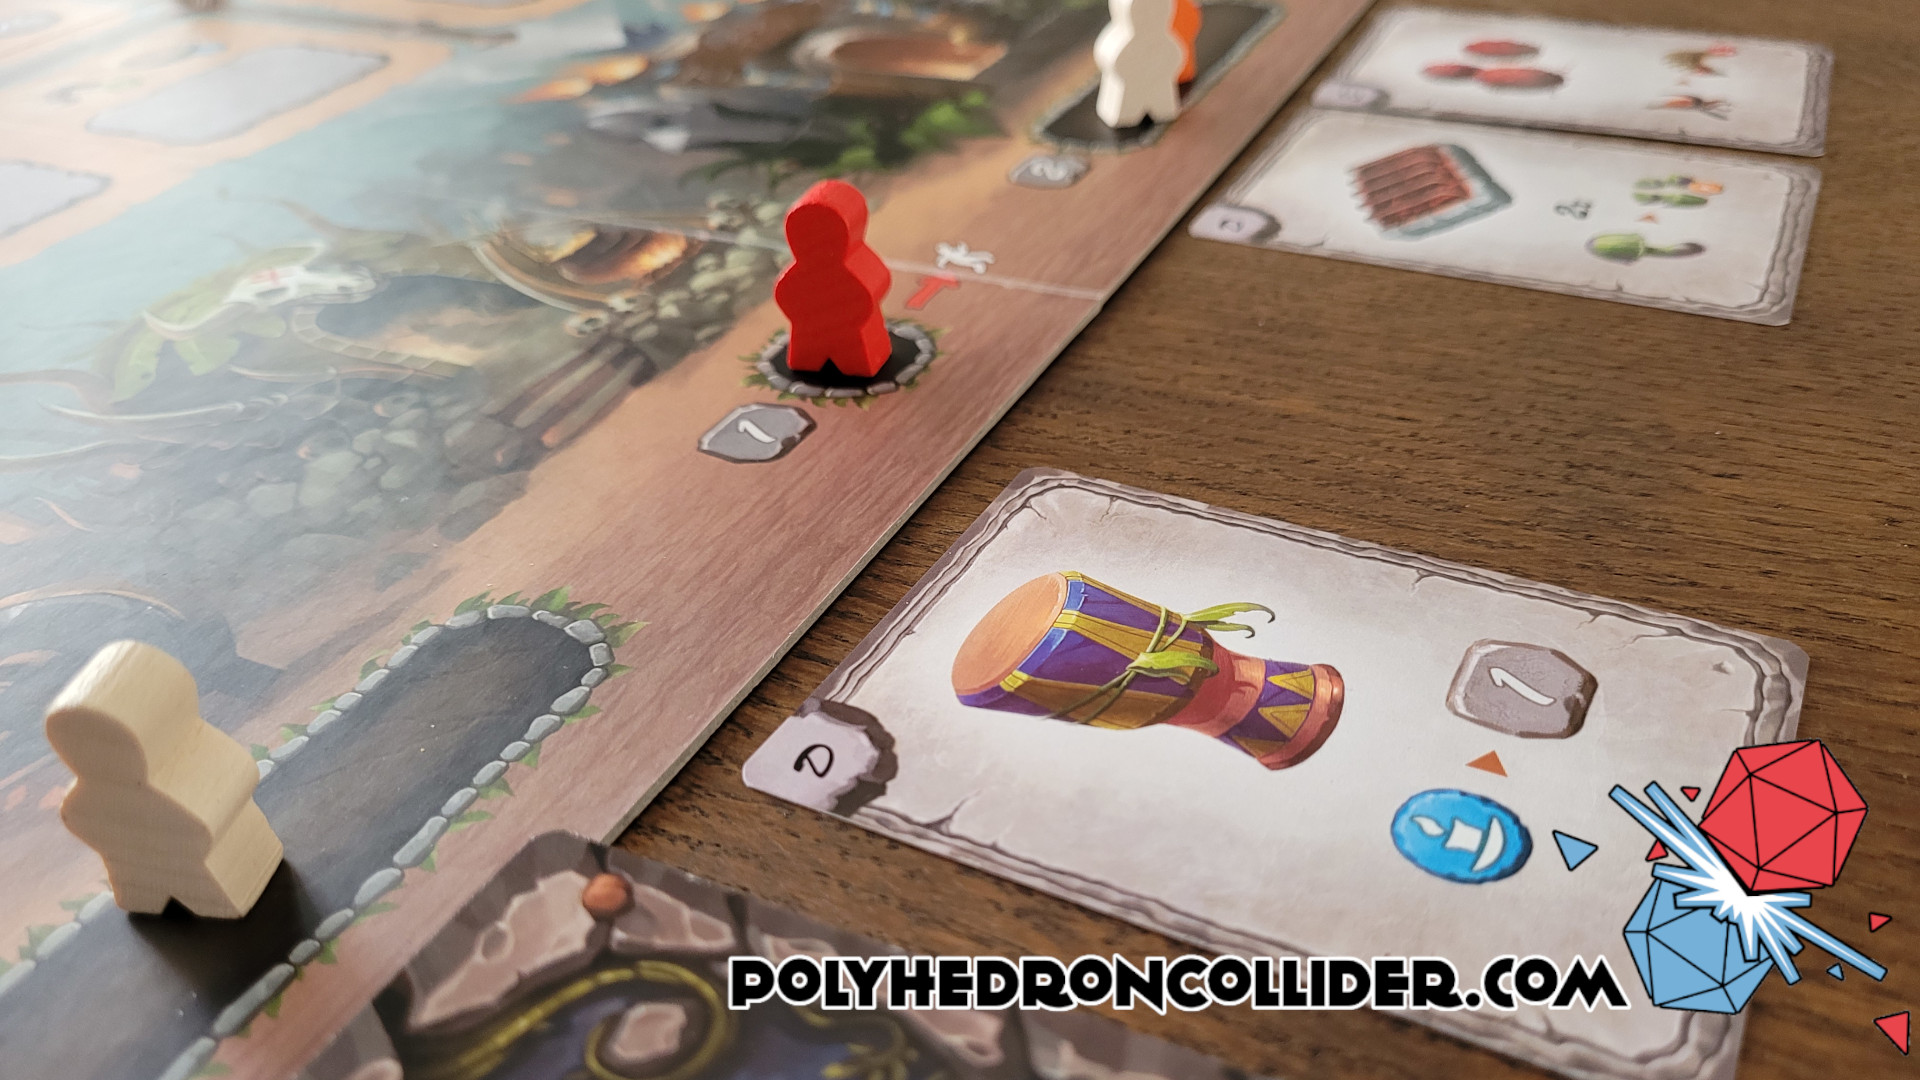 Polyhedron Collider Uluk Board Game Review - Inventions